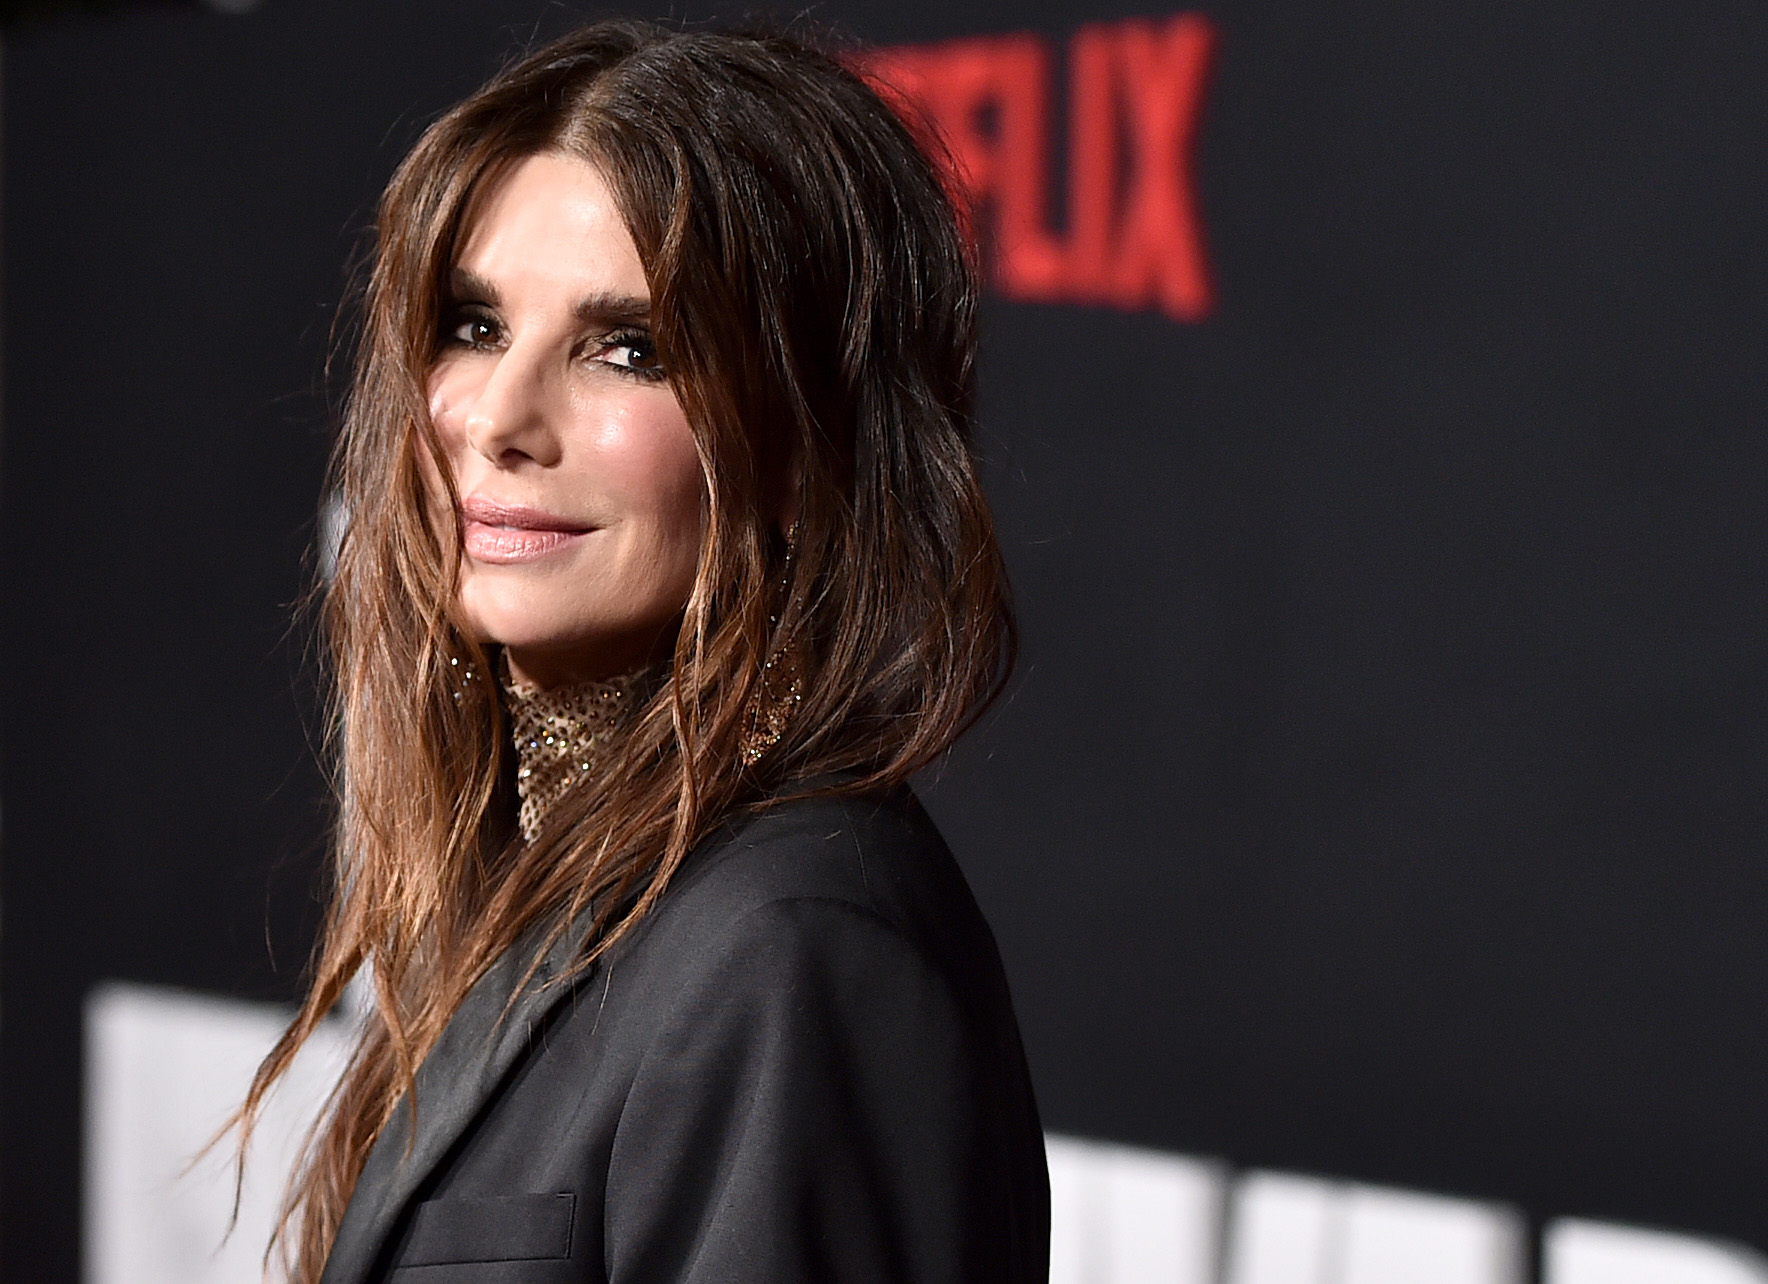 Sandra Bullock at the Los Angeles premiere of "The Unforgivable" on November 30, 2021, in Los Angeles, California | Source: Getty Images